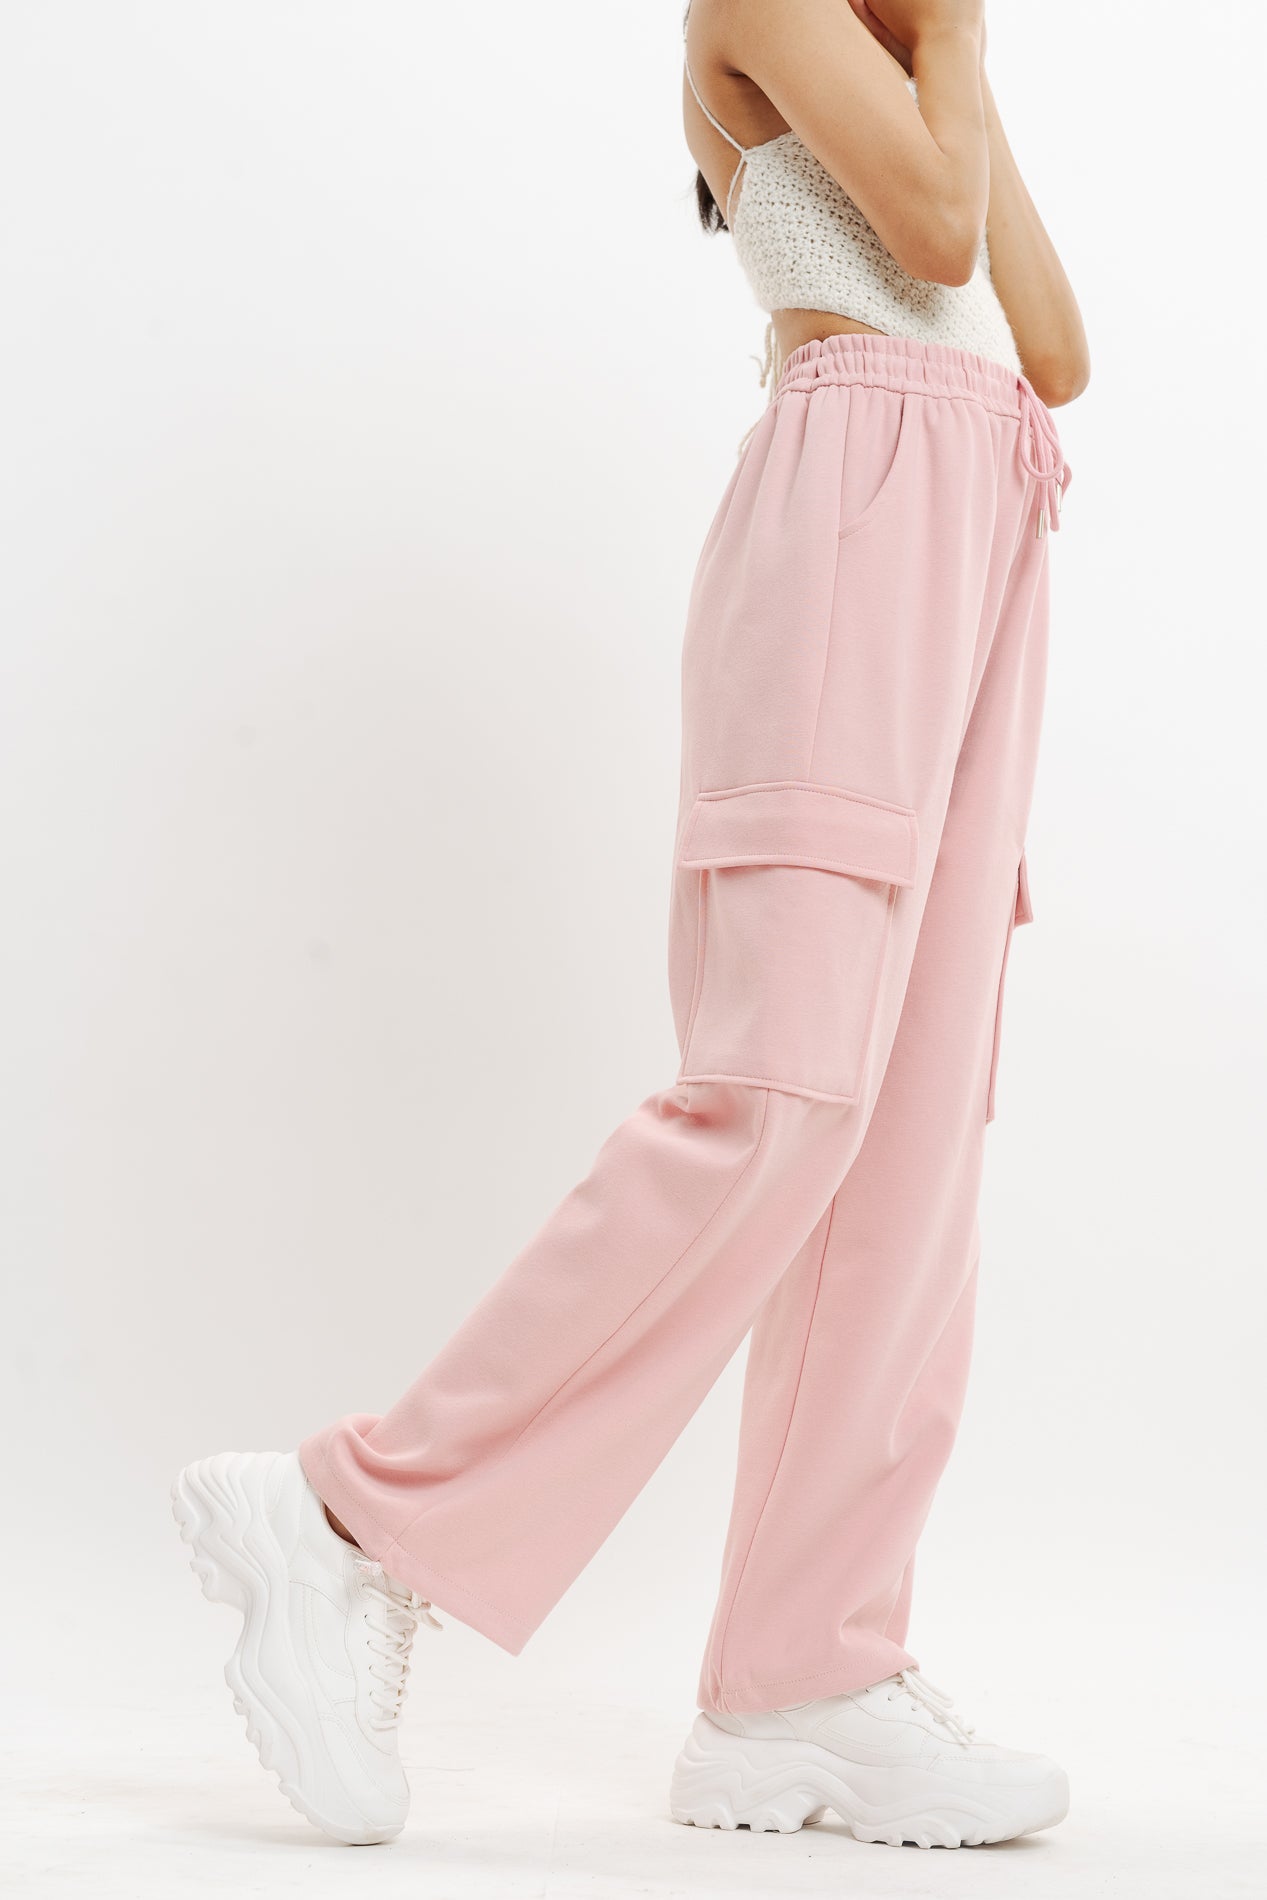 PANTS WITH POCKETS - Pastel pink